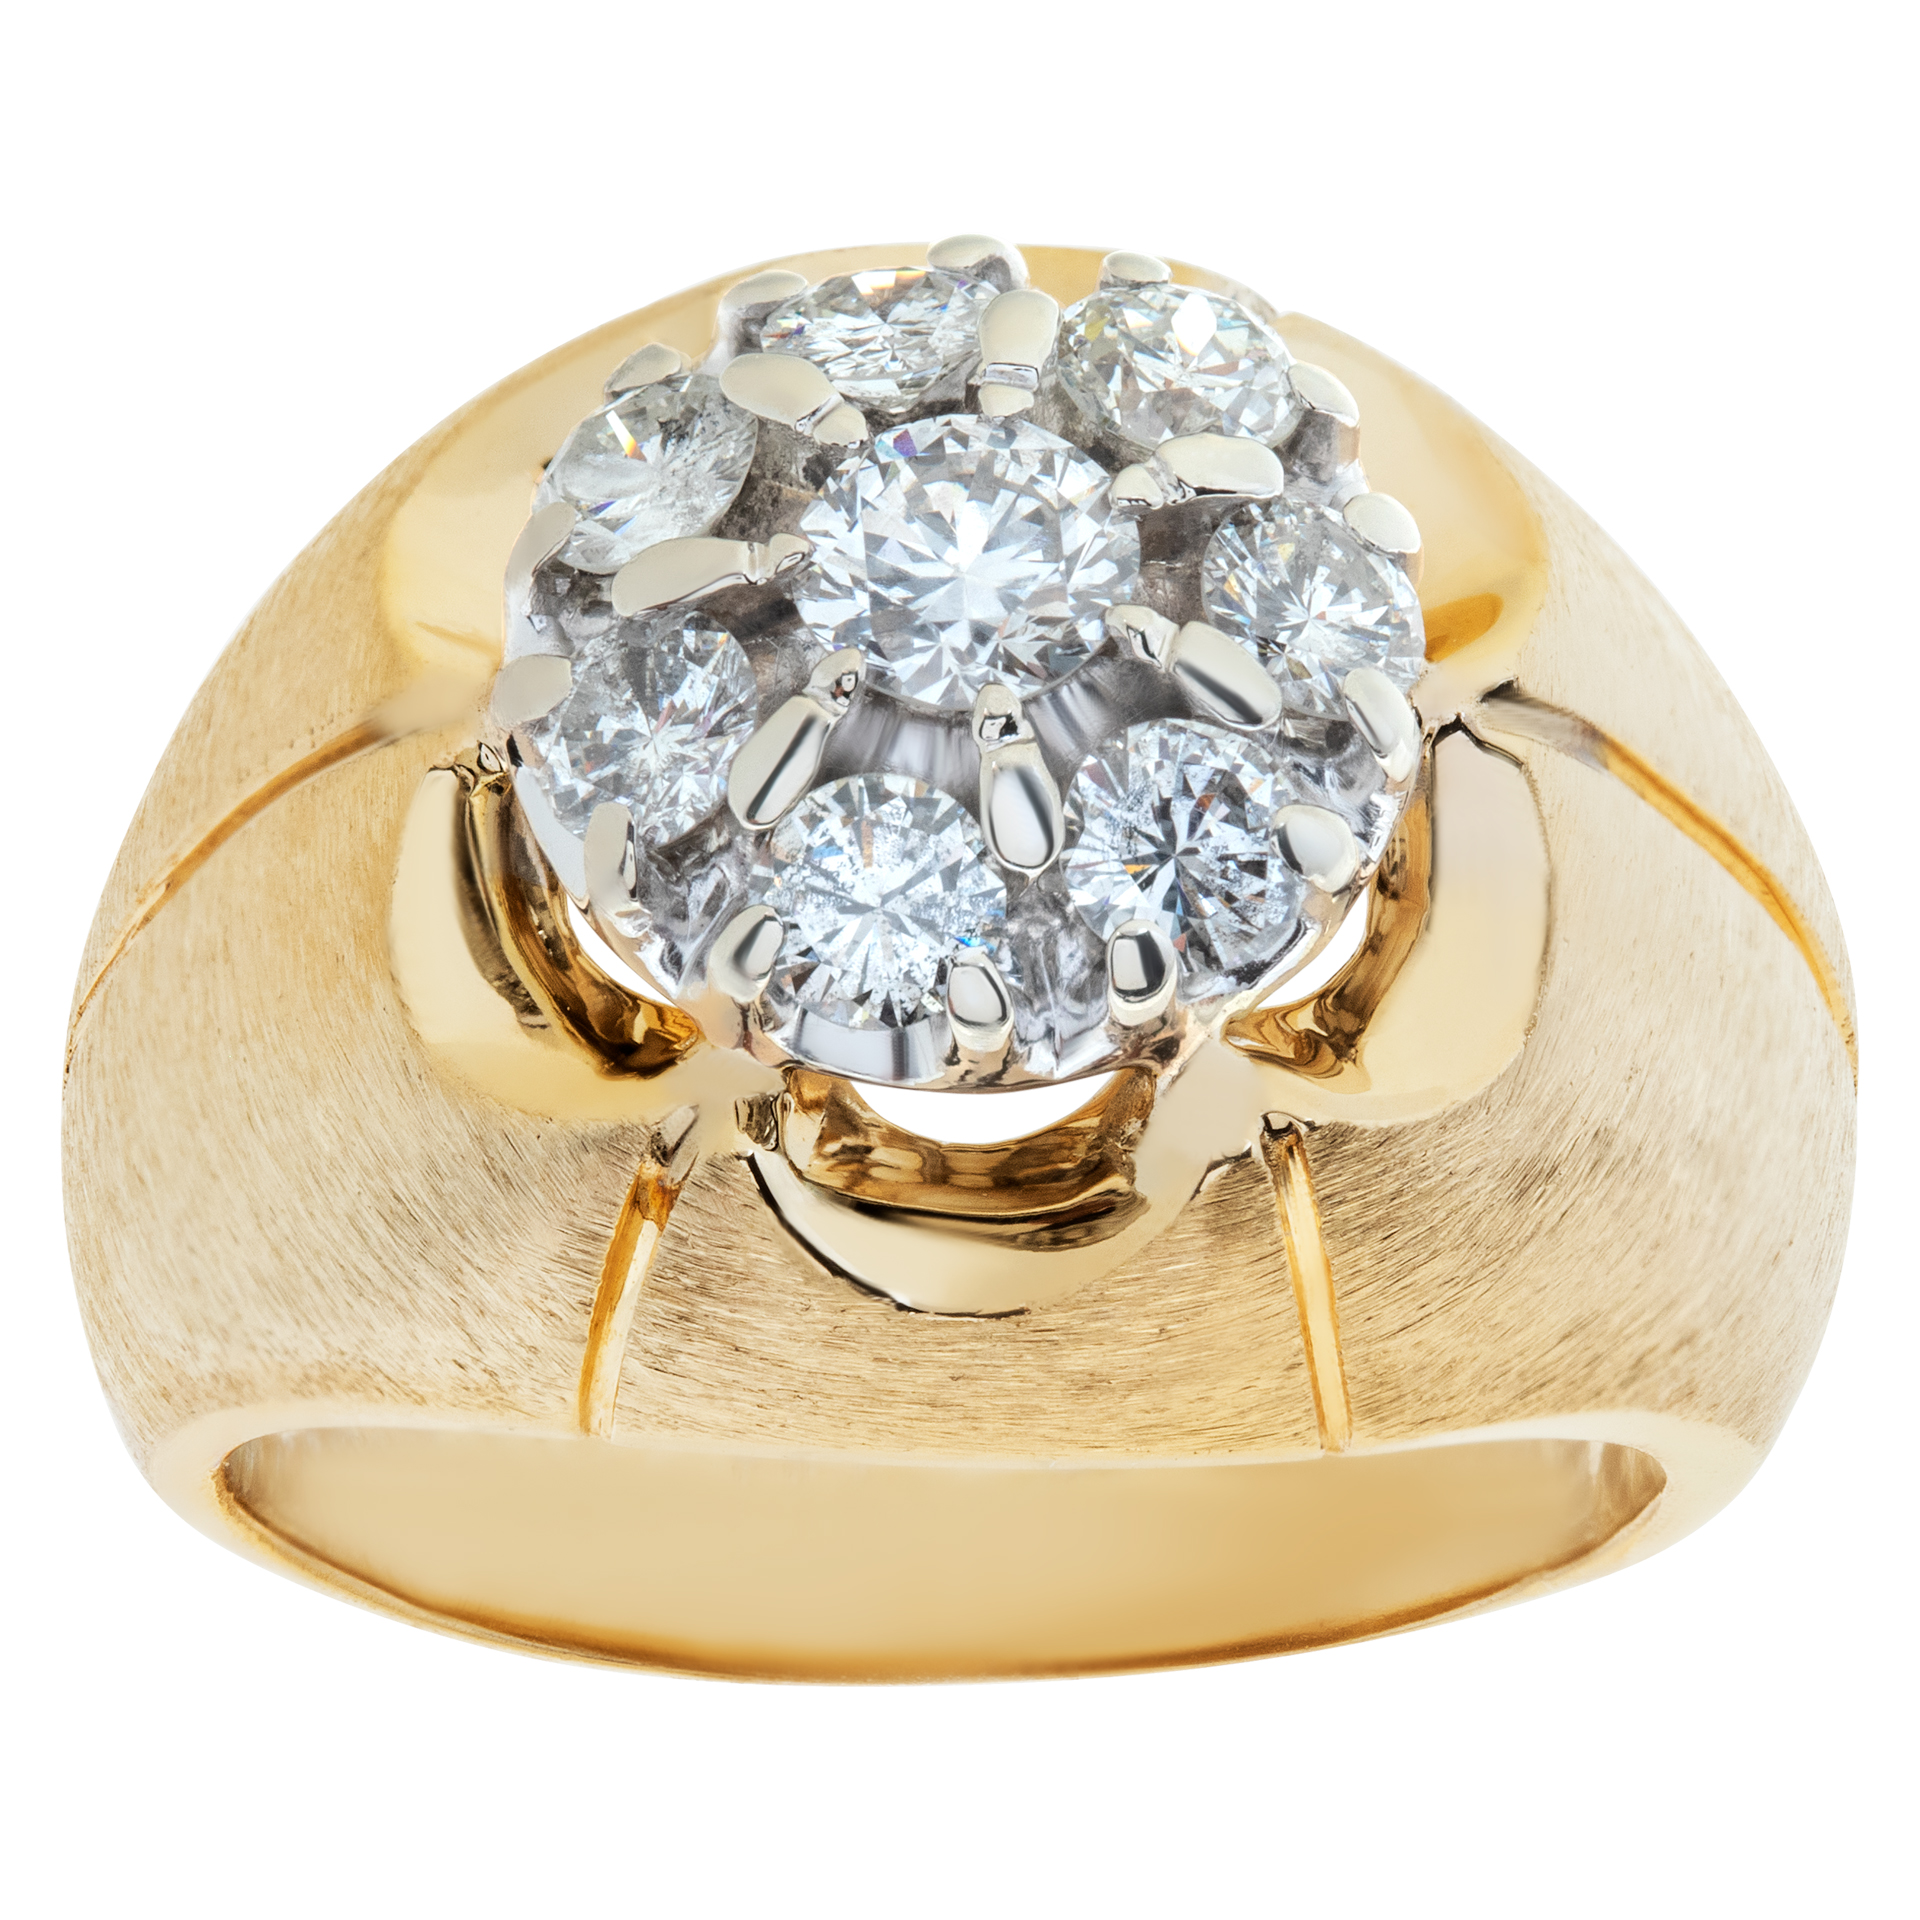 Attractive diamond ring in 14k yellow gold. 1.00 carats in diamonds. Size 8 image 1